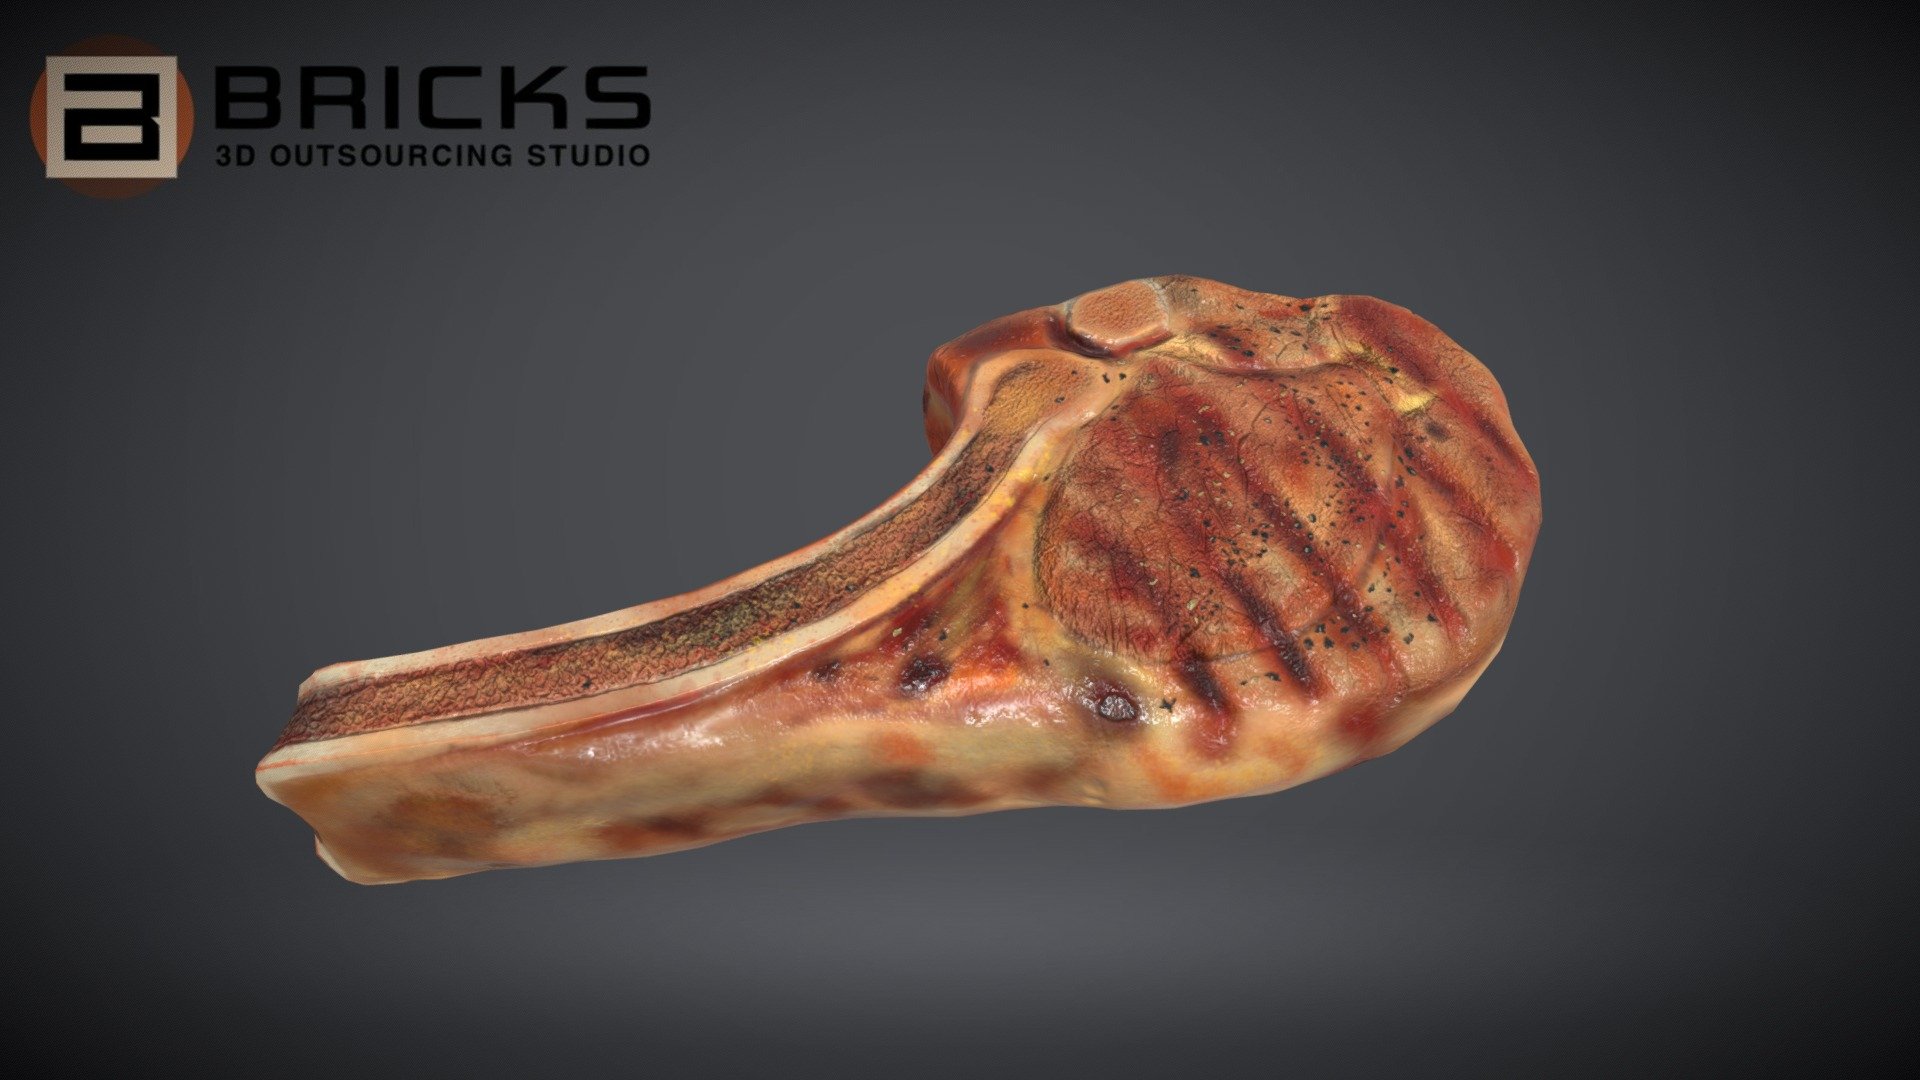 PBR Food Asset:
Tomahawk
Polycount: 2592
Vertex count: 1298
Texture Size: 2048px x 2048px
Normal: OpenGL

If you need any adjust in file please contact us: team@bricks3dstudio.com

Hire us: tringuyen@bricks3dstudio.com
Here is us: https://www.bricks3dstudio.com/
        https://www.artstation.com/bricksstudio
        https://www.facebook.com/Bricks3dstudio/
        https://www.linkedin.com/in/bricks-studio-b10462252/ - Tomahawk - Buy Royalty Free 3D model by Bricks Studio (@bricks3dstudio) 3d model